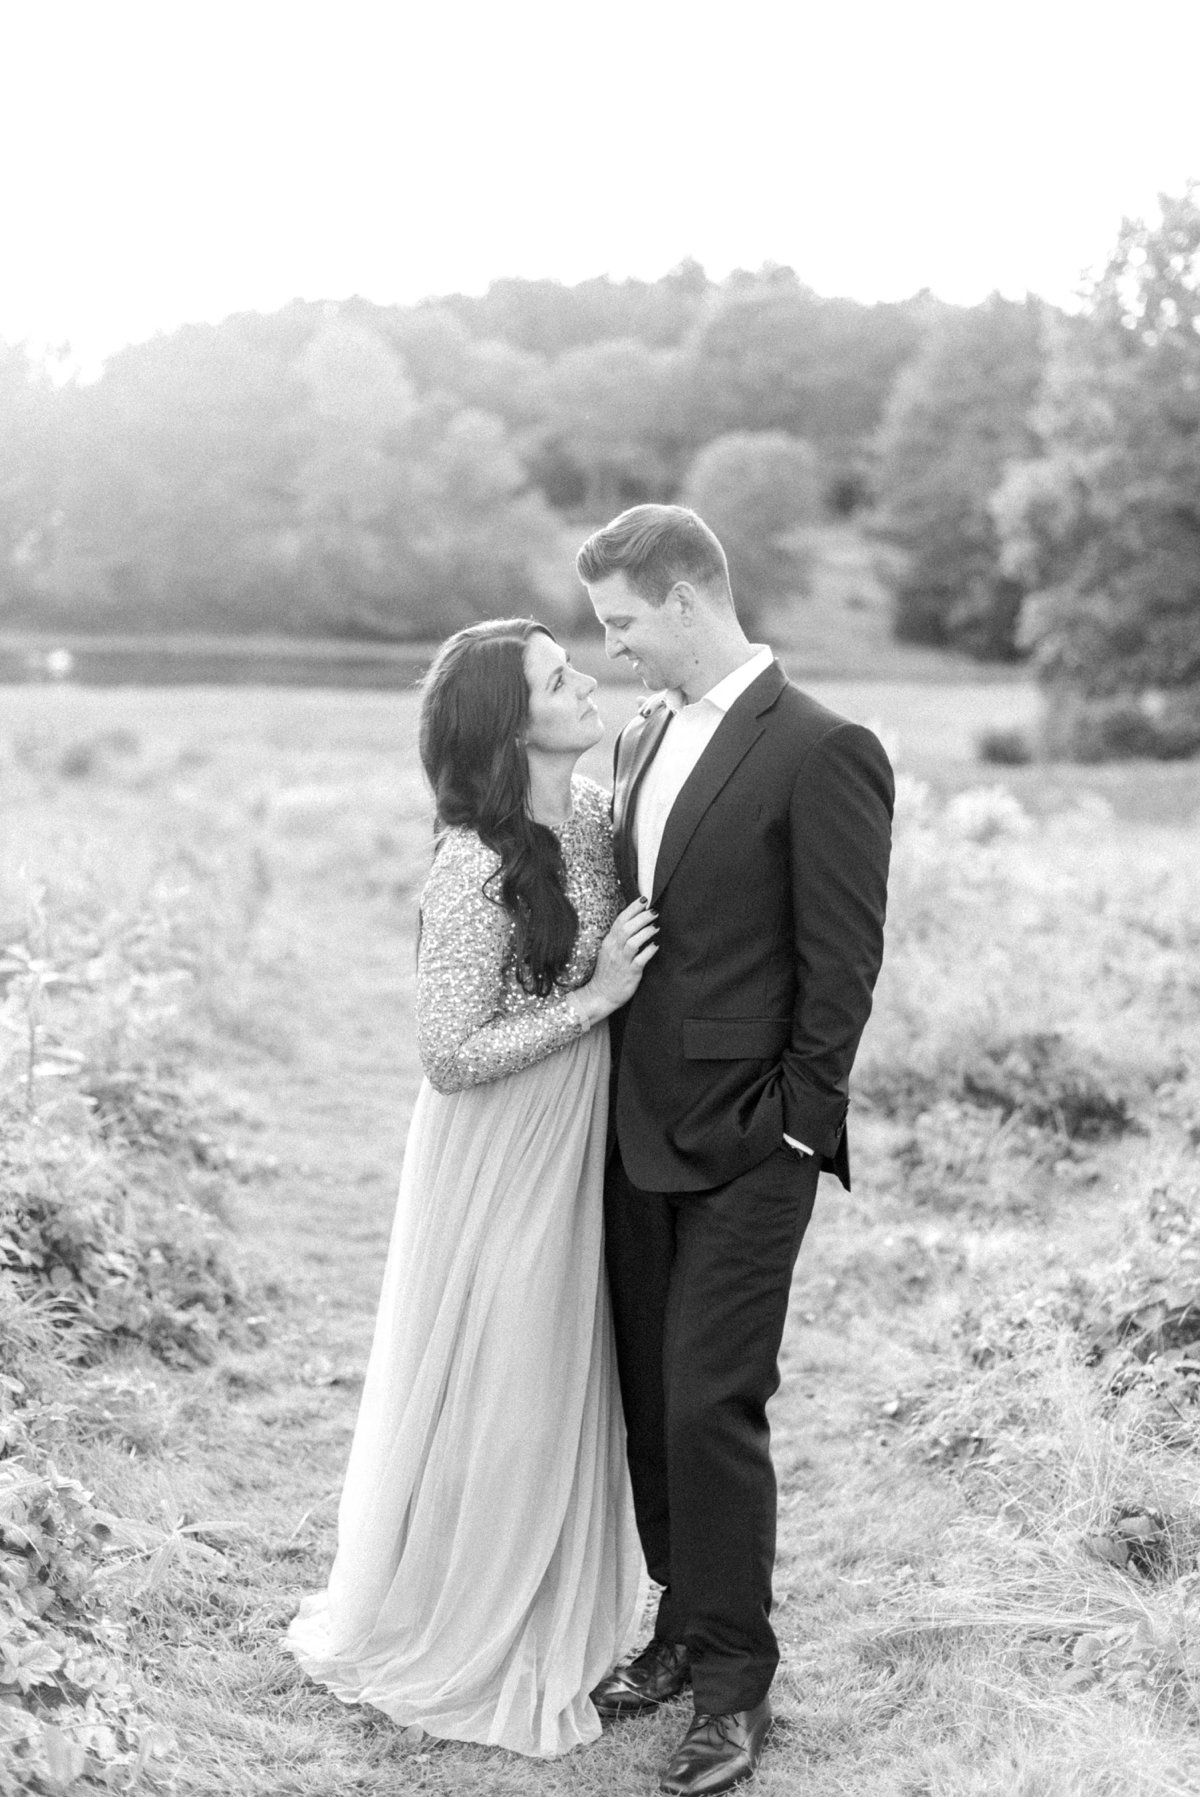 Romantic & Formal Wagon Hill Farm Anniversary Session in Durham, New Hampshire by Boston Wedding Photographer Annmarie Swift